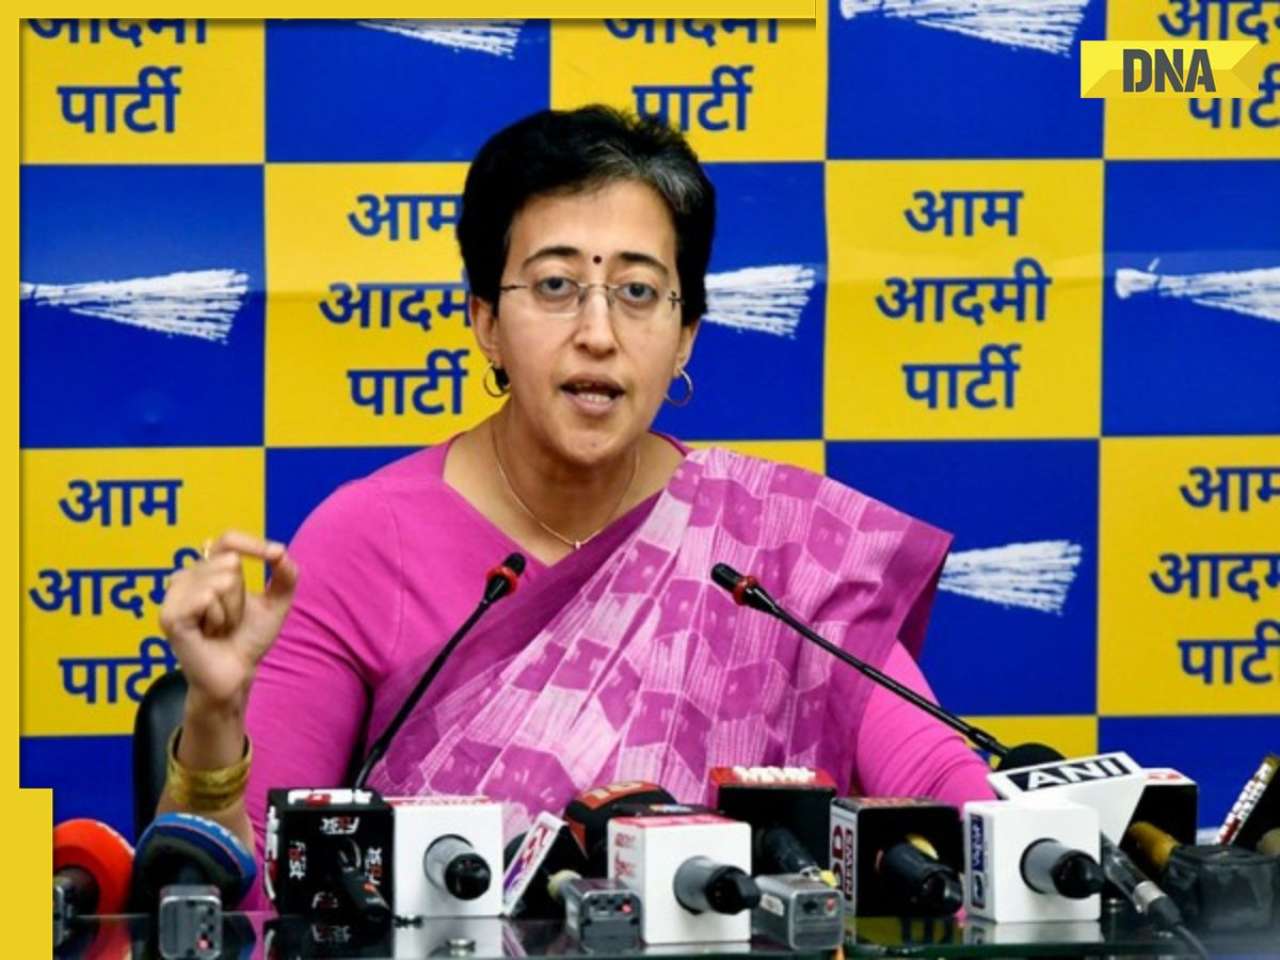 EC sends notice to AAP's Atishi over her 'join BJP or face arrest' claim